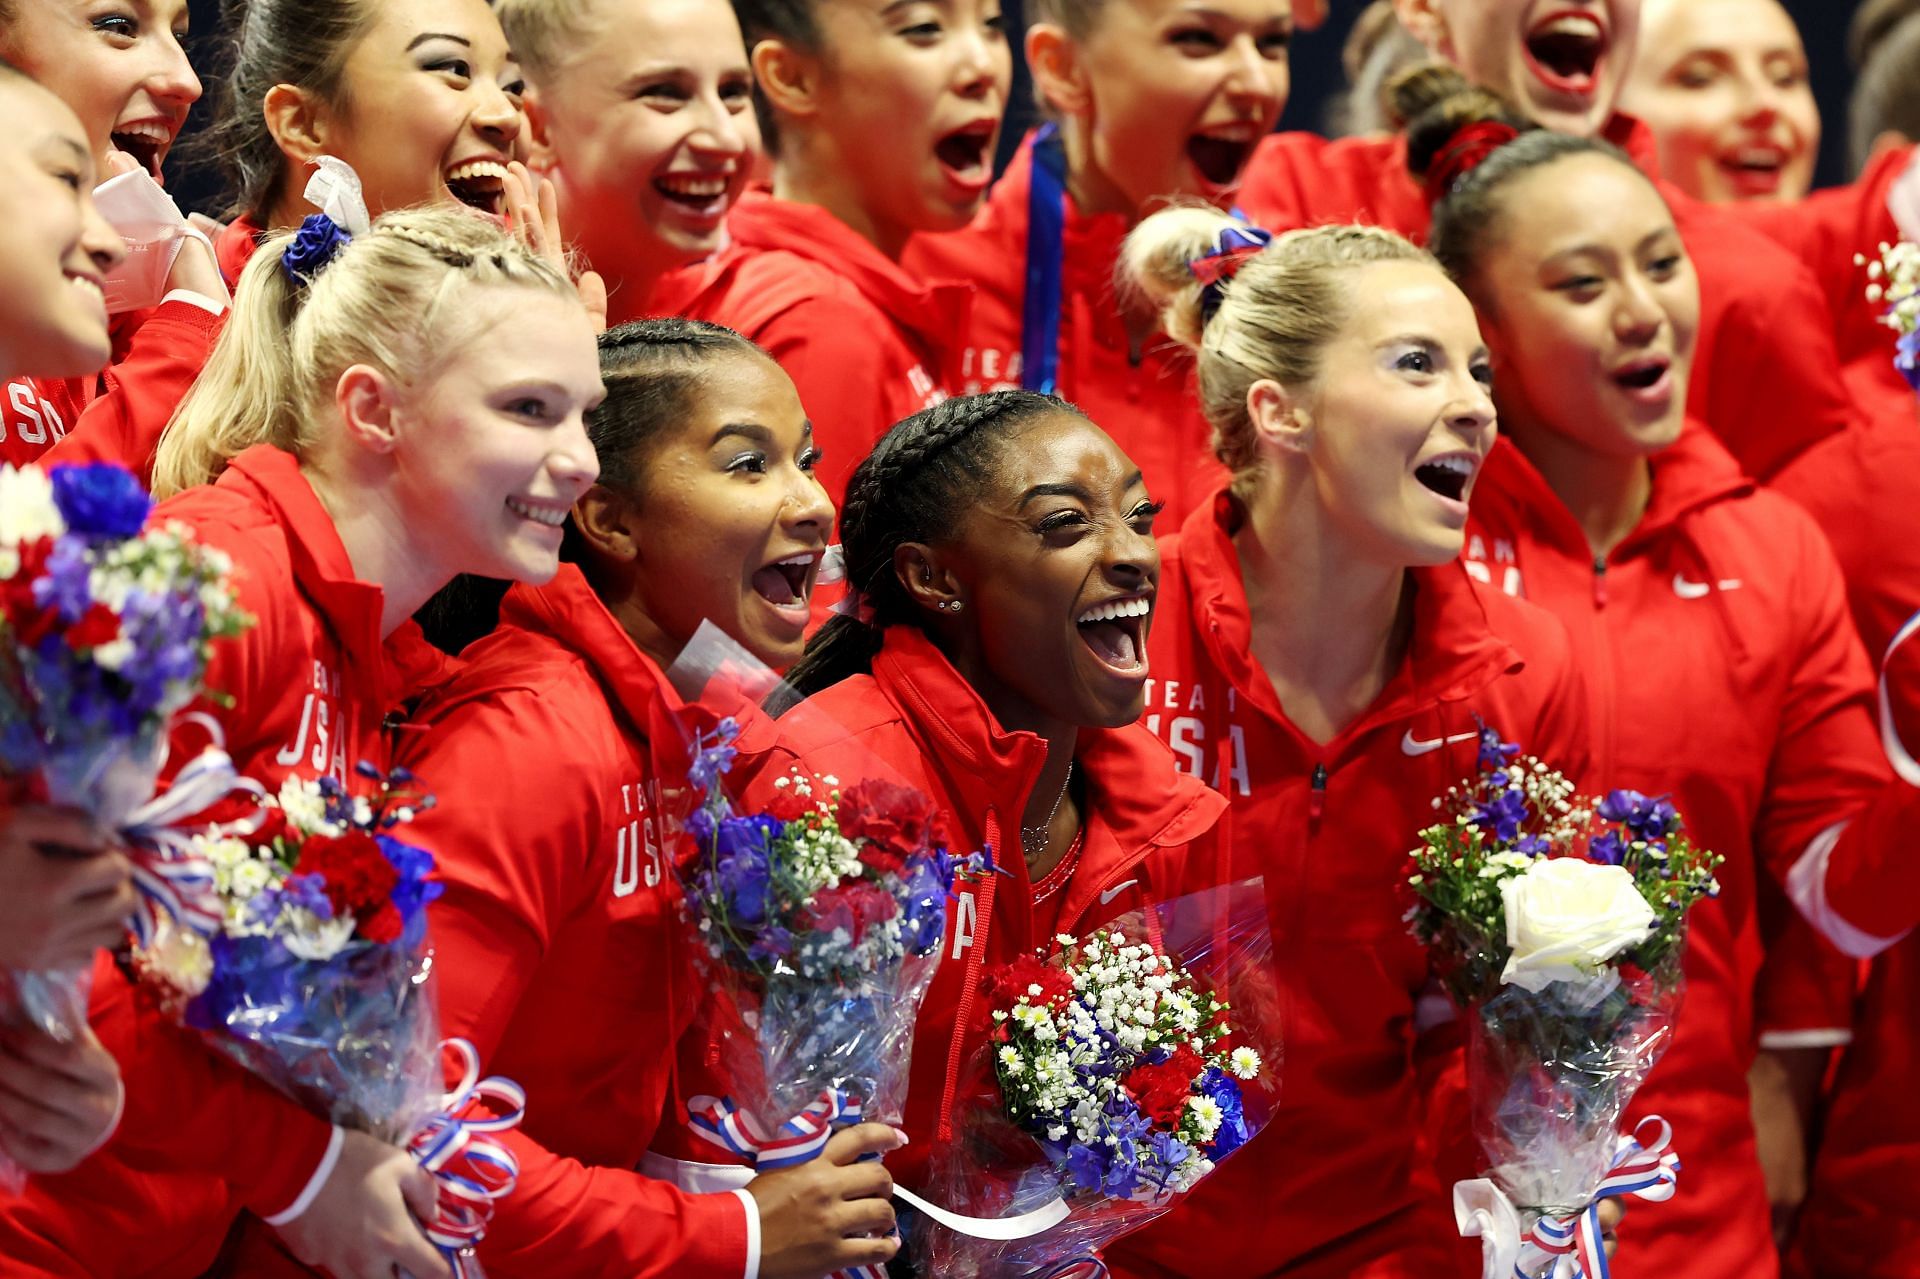 (L-R) Jade Carey, Jordan Chiles, Simone Biles, Mykayla Skinner and Sunisa Lee, pose following the Women&#039;s competition of the 2021 U.S. Gymnastics Olympic Trials at America&rsquo;s Center on June 27, 2021 in St Louis, Missouri. (Photo by Carmen Mandato/Getty Images)